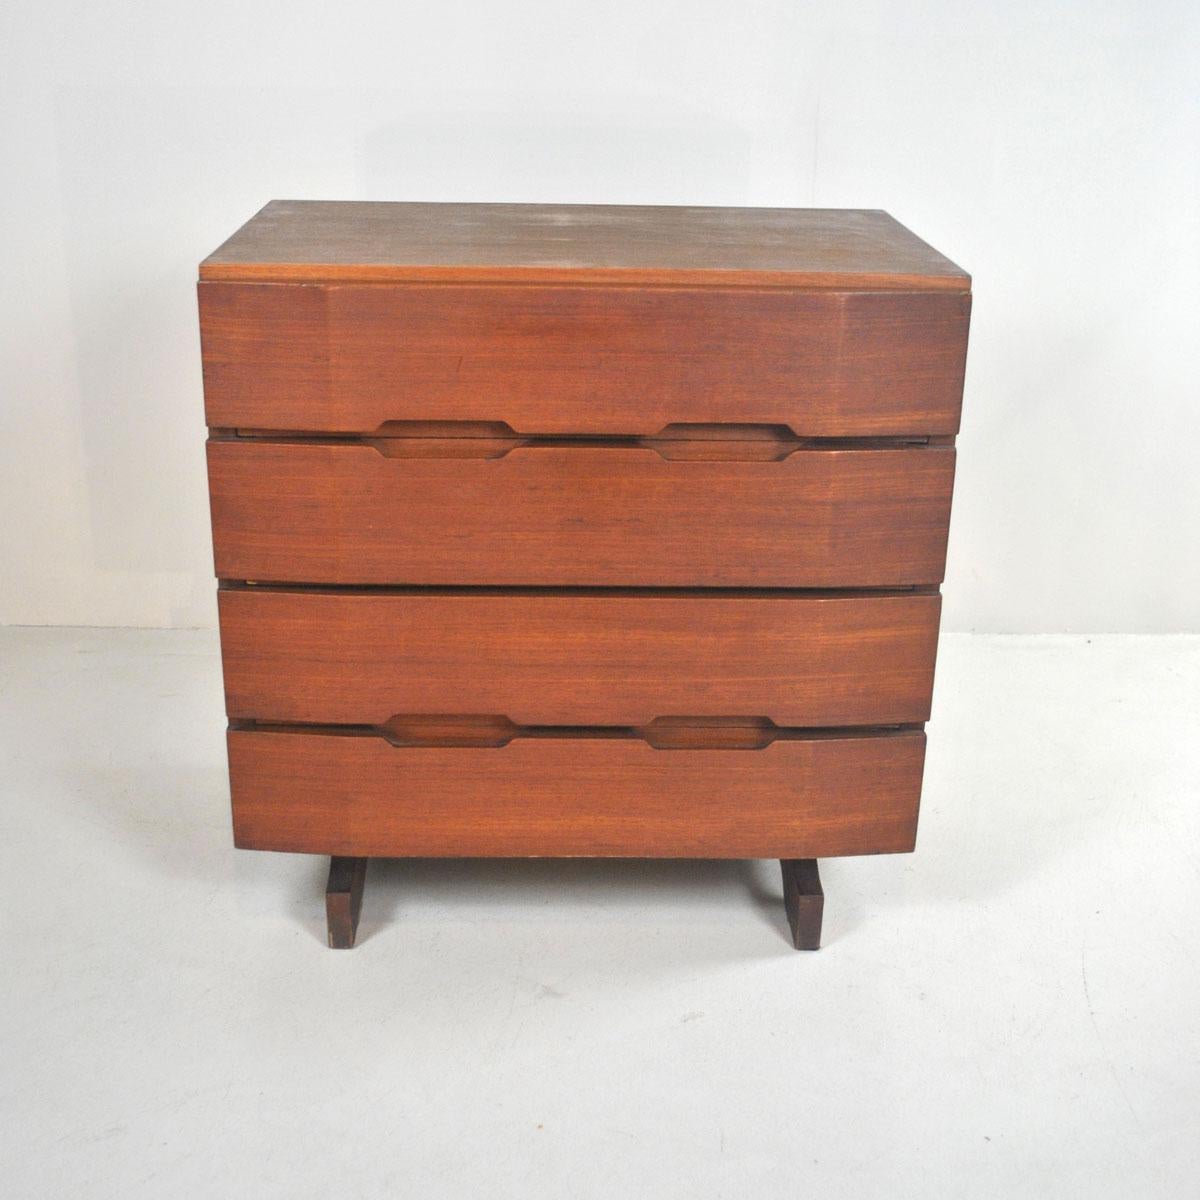 Dassi Italian midcentury commode in teak from mid-1960s with four comfortable drawers.